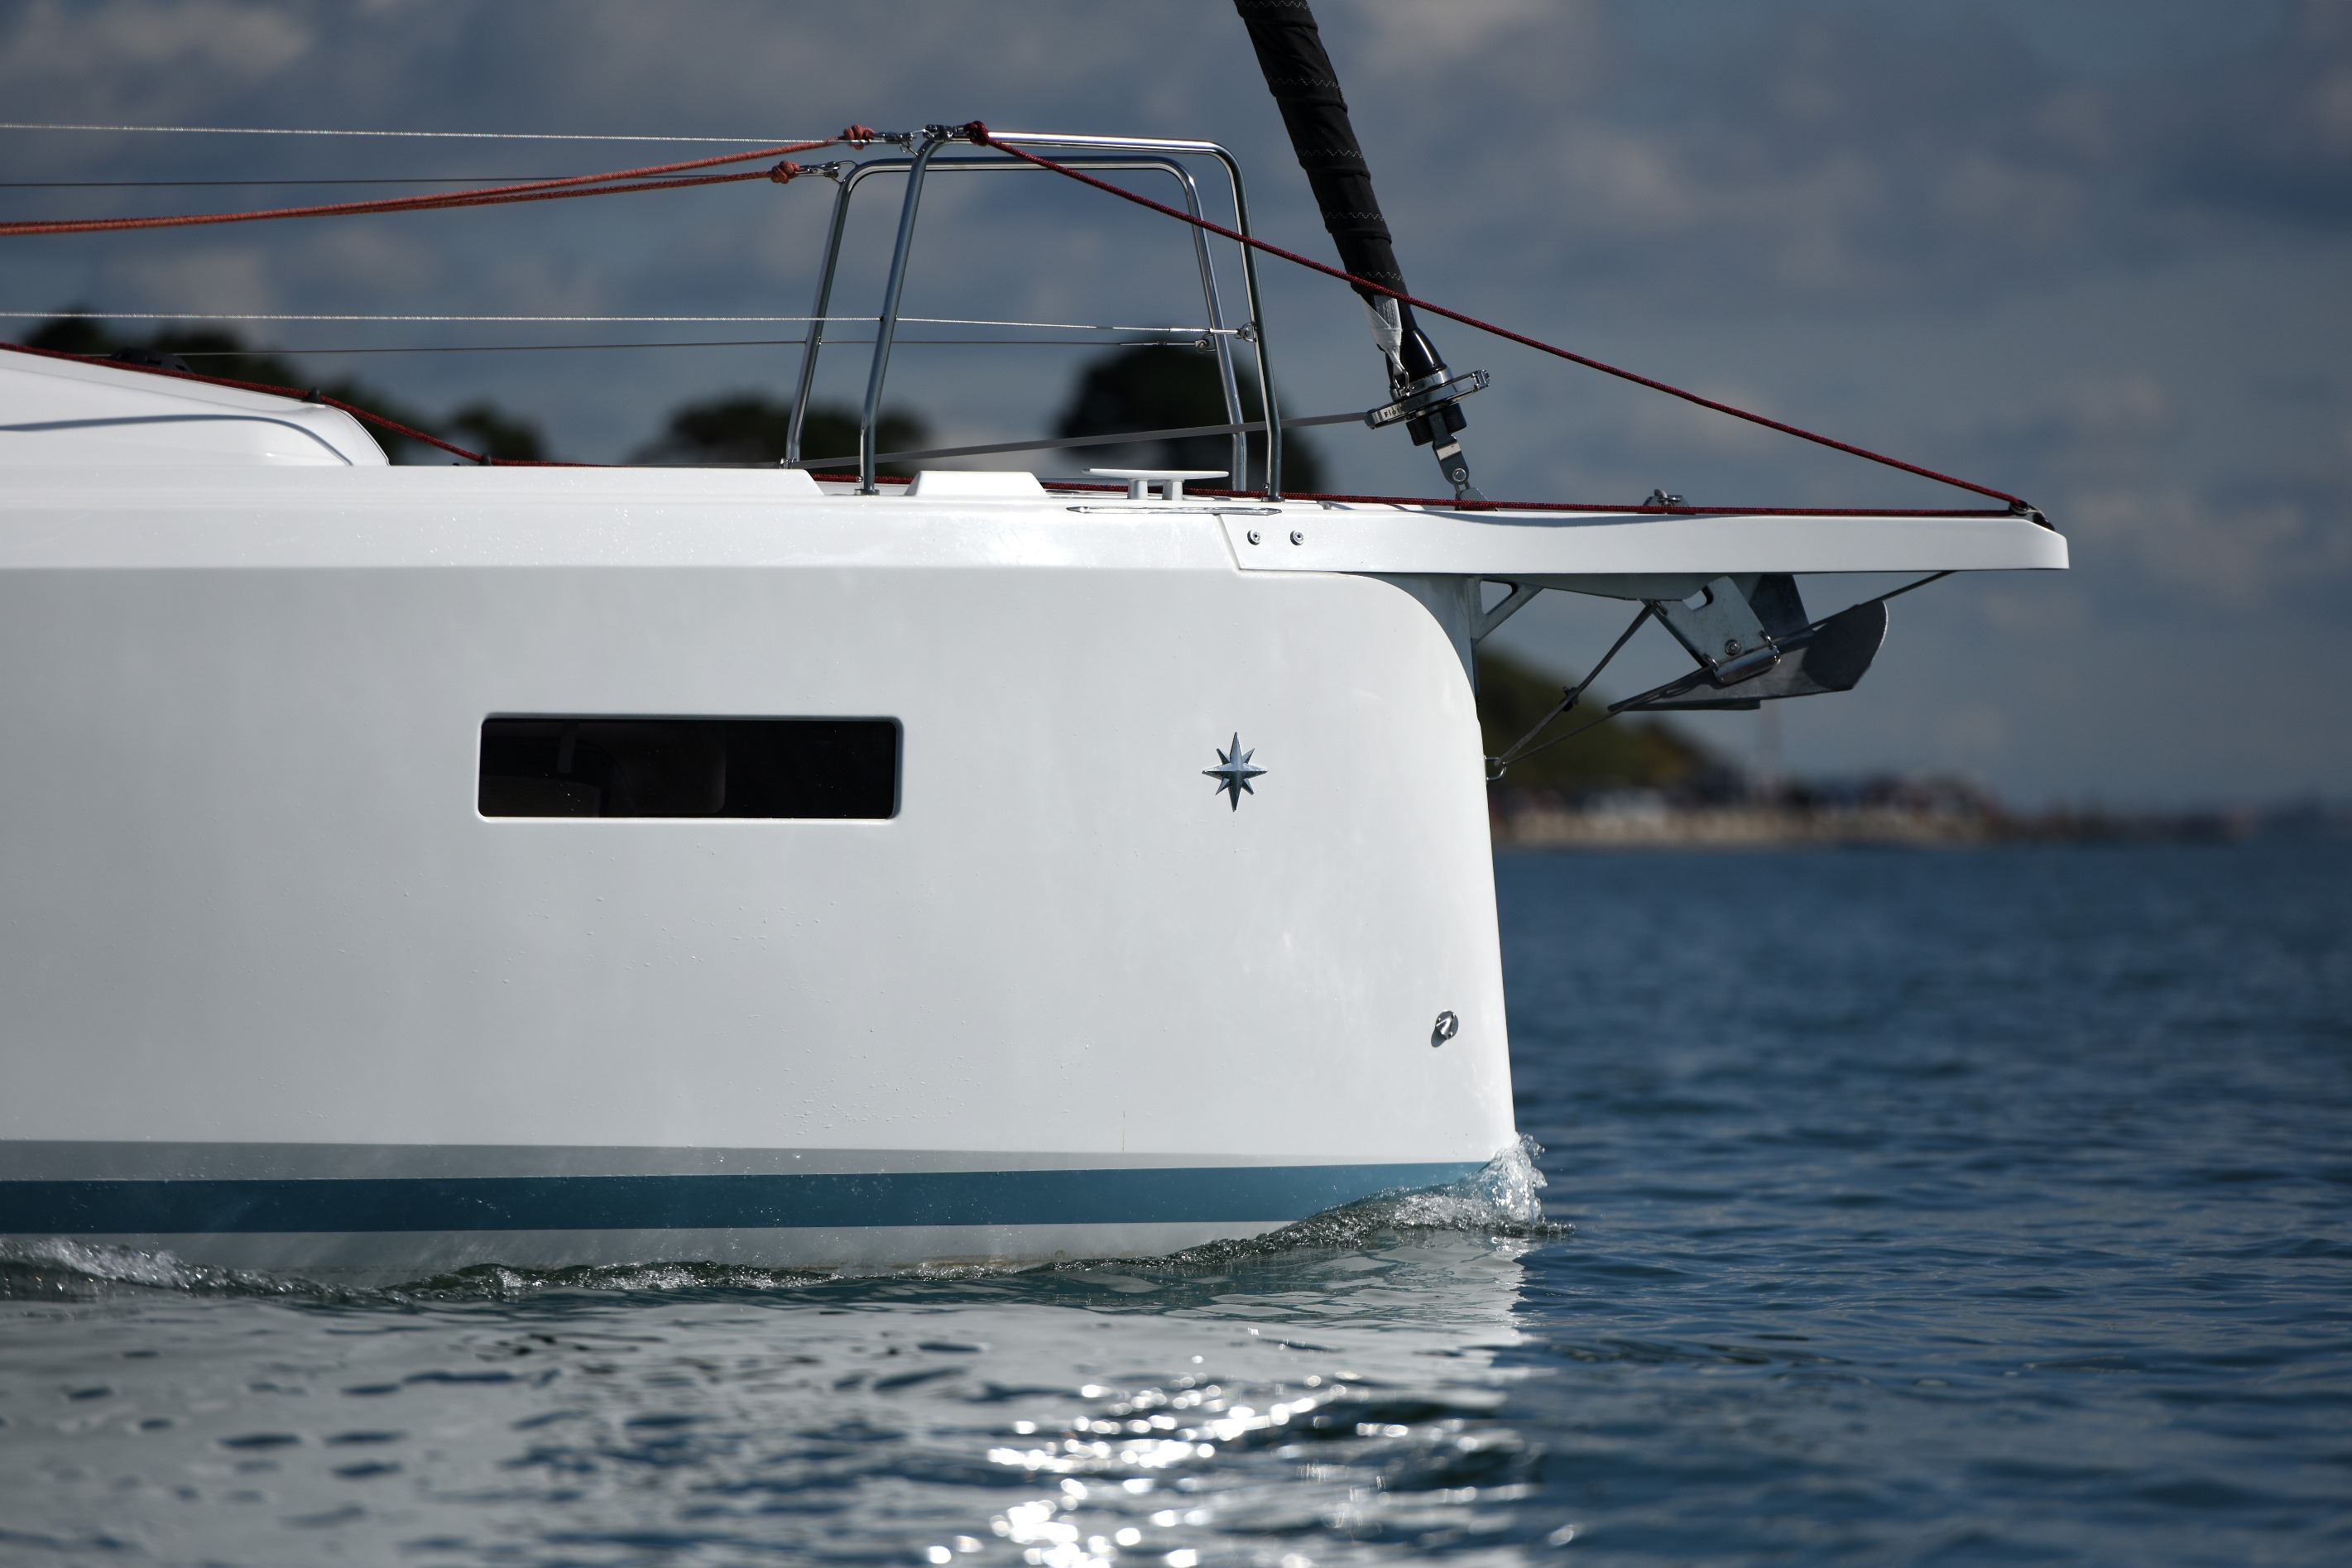 sun-odyssey-380-with-swing-keel-option_6152fa6a588c9